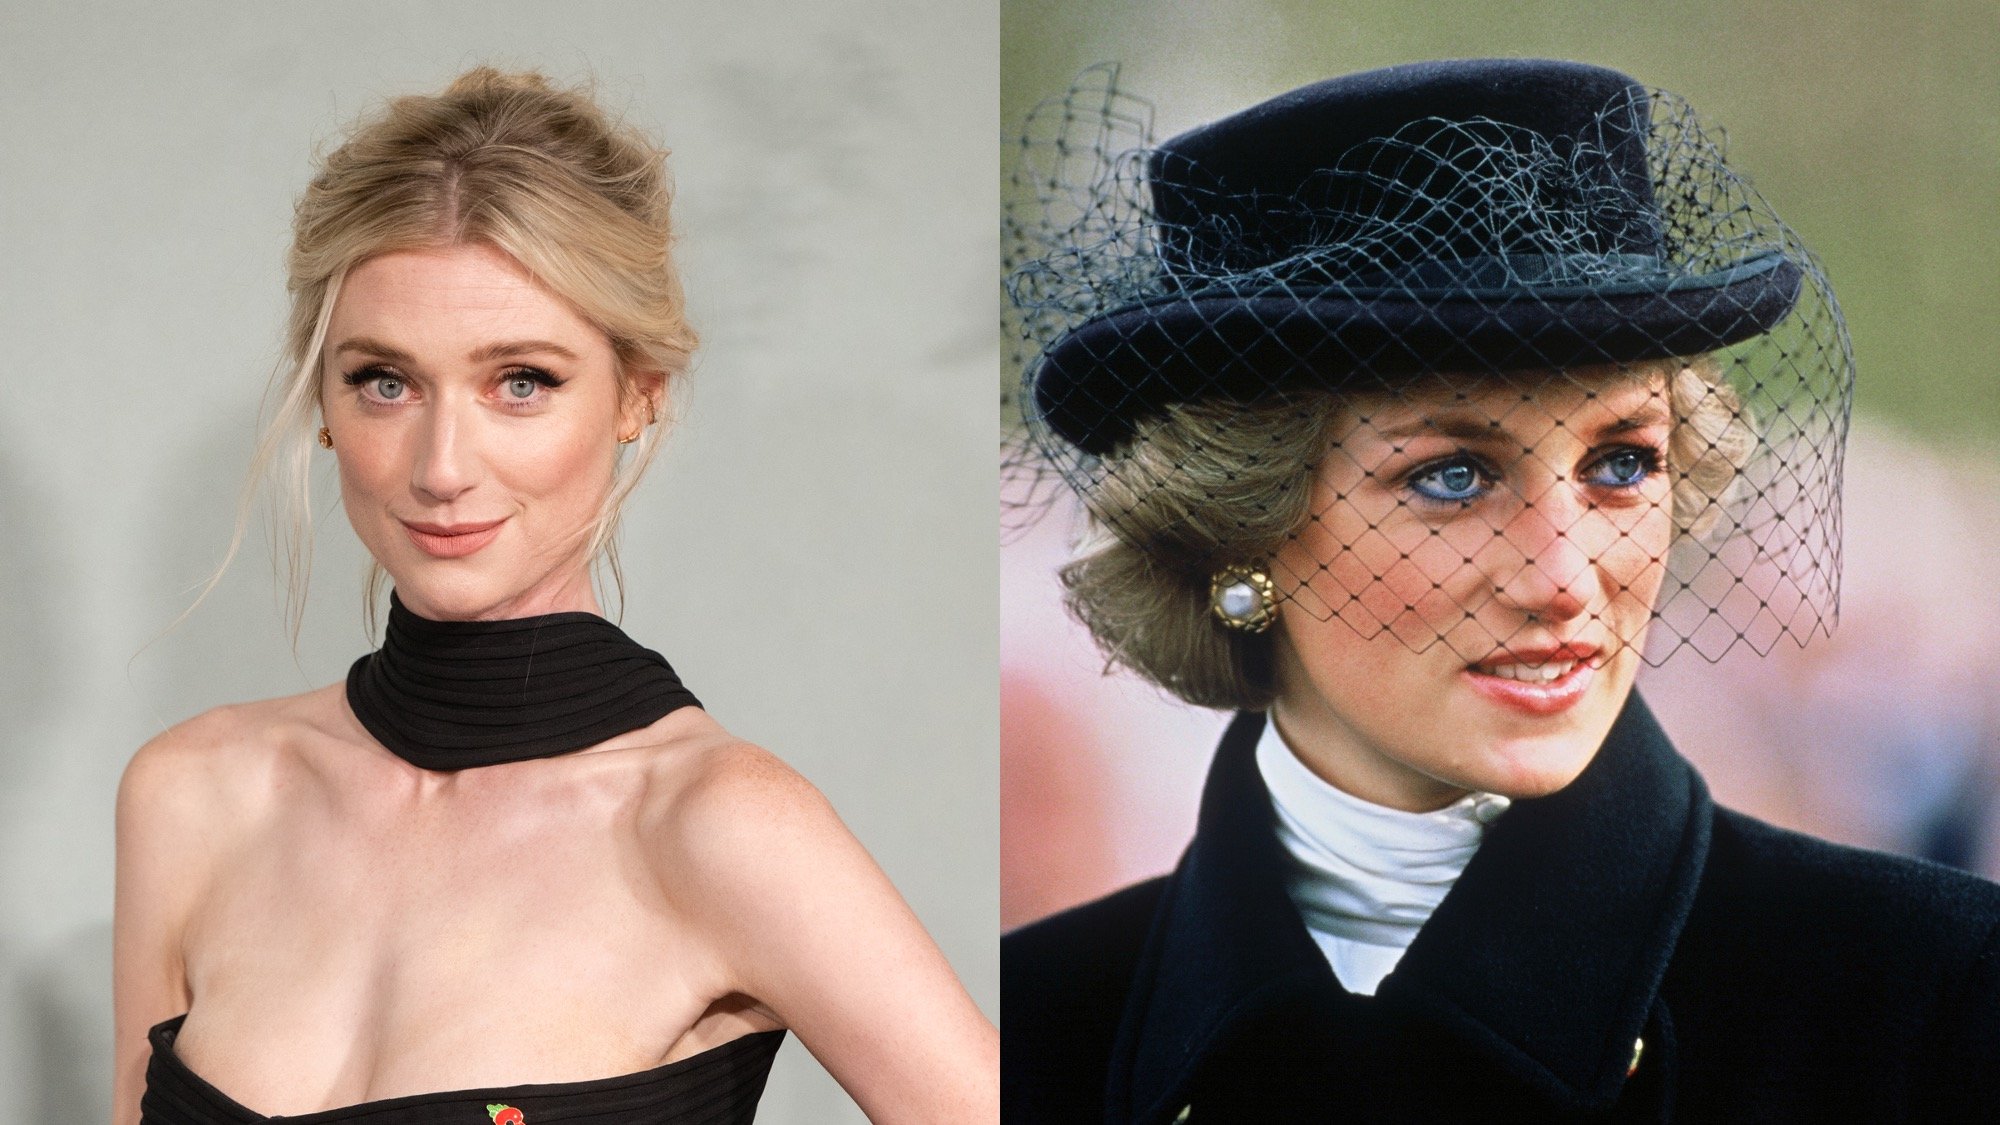 Elizabeth Debicki on Playing Princess Diana in The Crown (Exclusive)